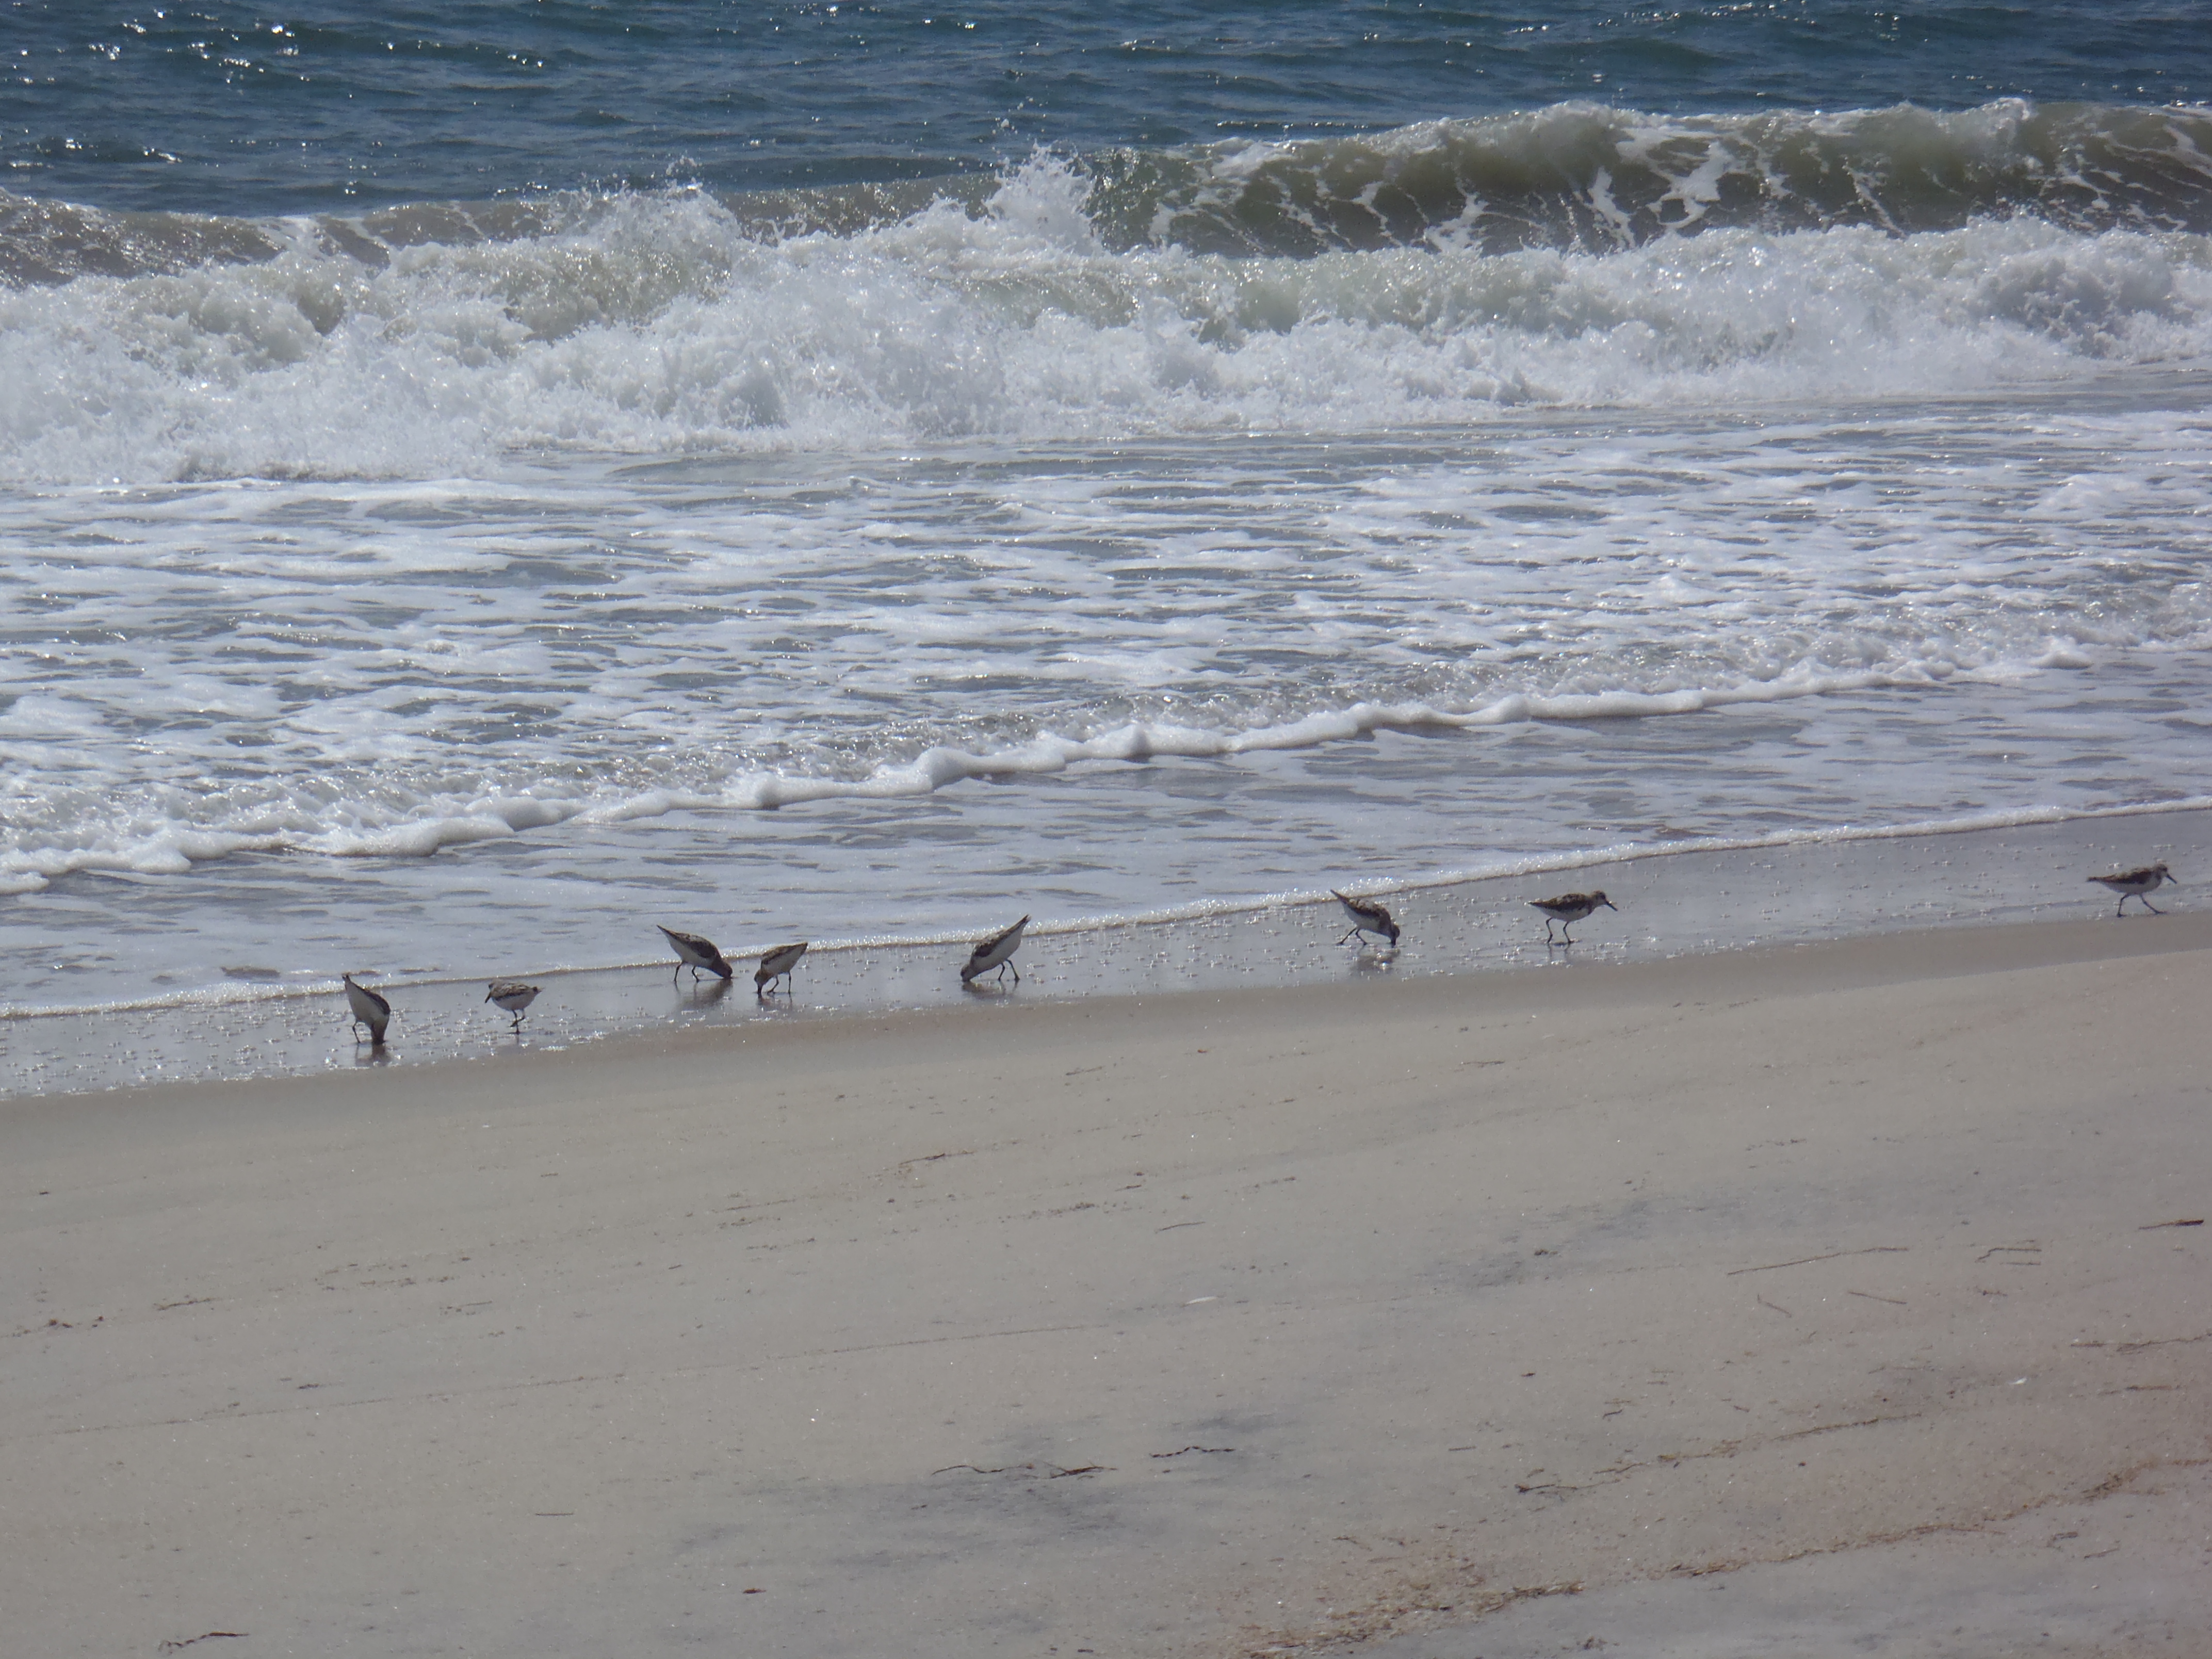 small sandpipers poke their bills in the sand while waves break in the background